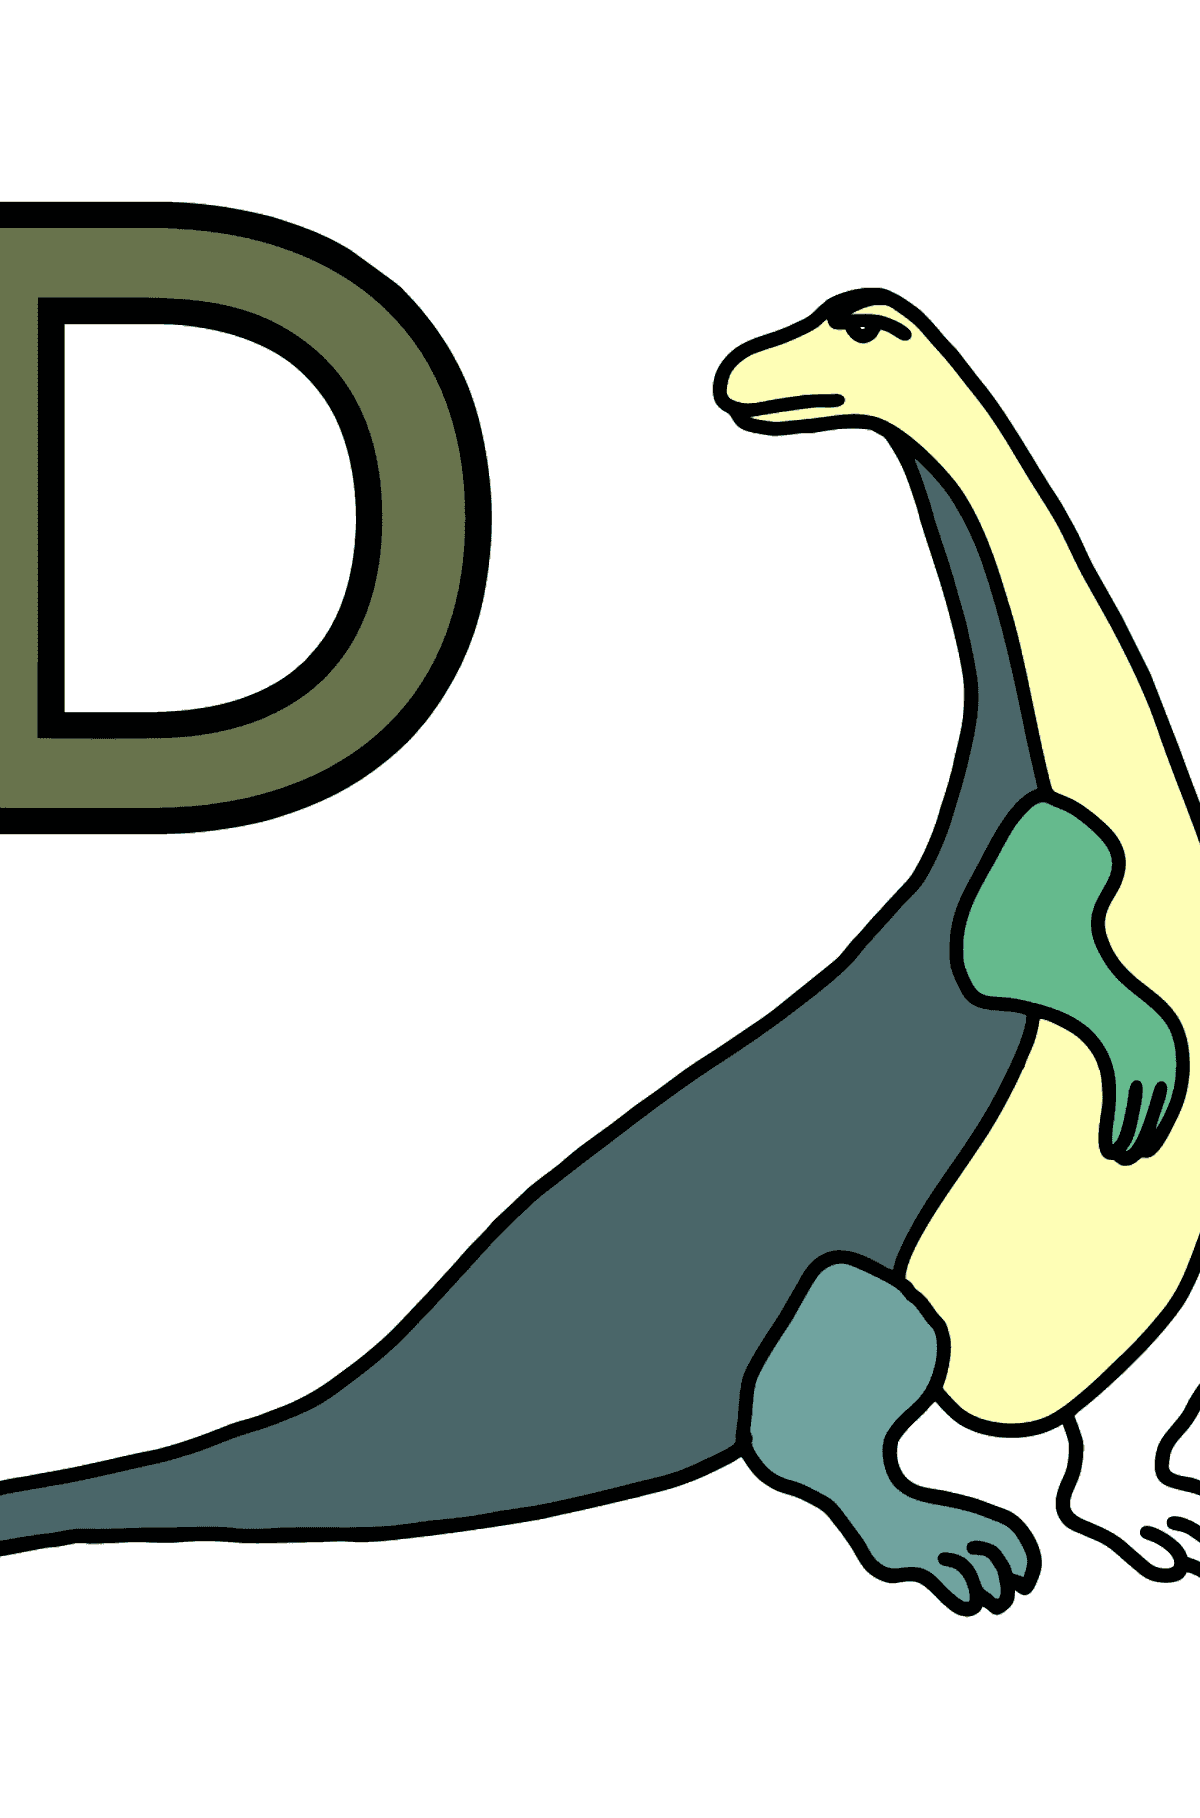 Portuguese Letter D coloring pages - DINOSSAURO - Coloring Pages for Kids